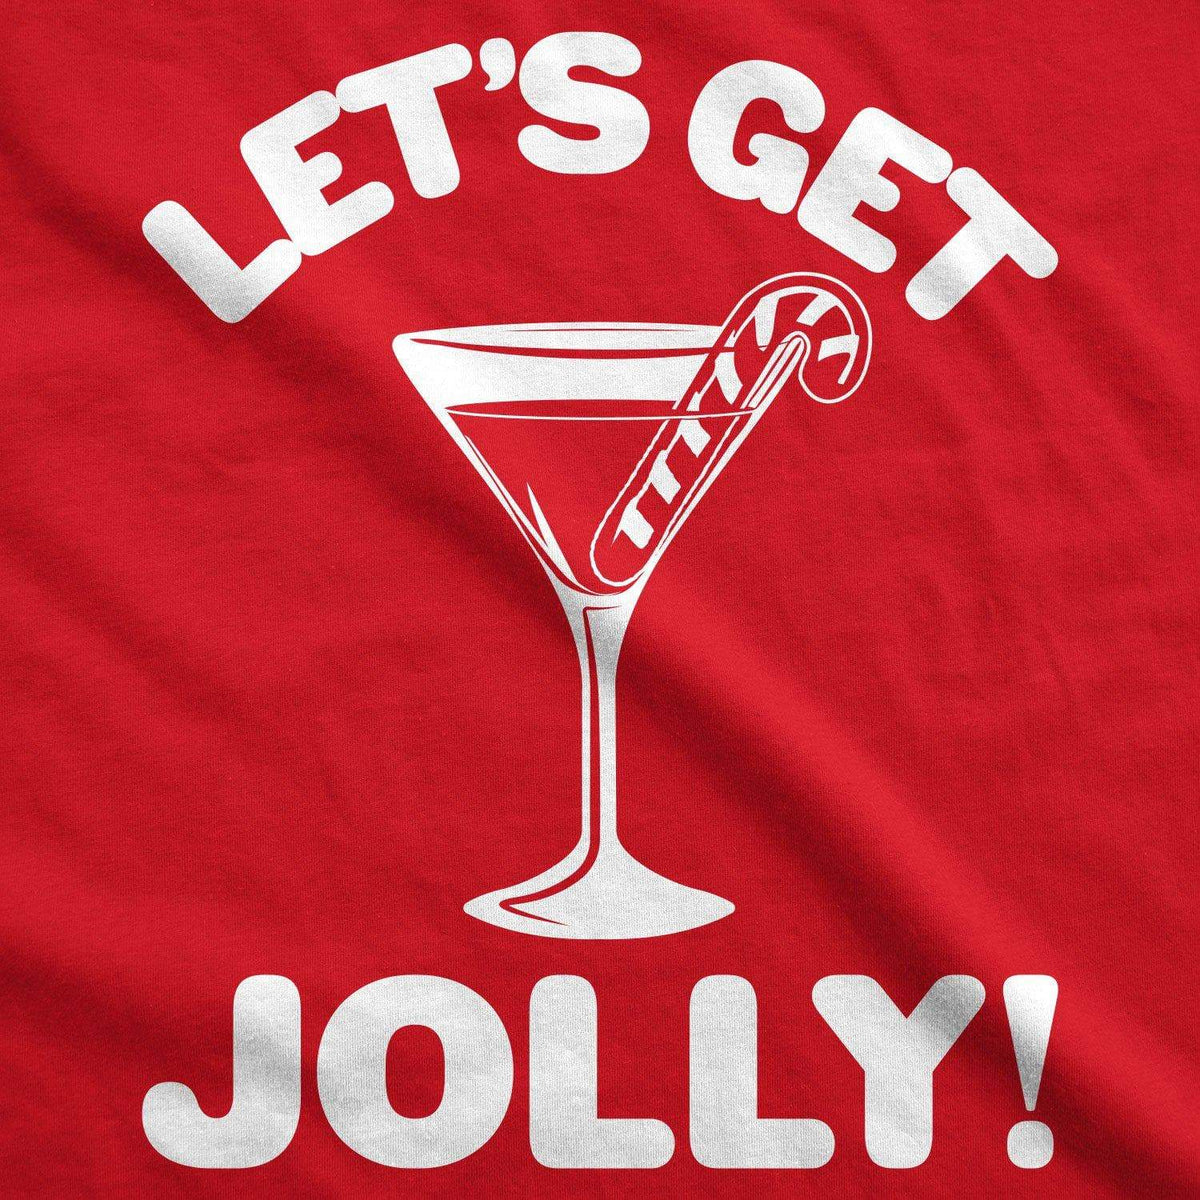 Let&#39;s Get Jolly! Women&#39;s Tshirt - Crazy Dog T-Shirts